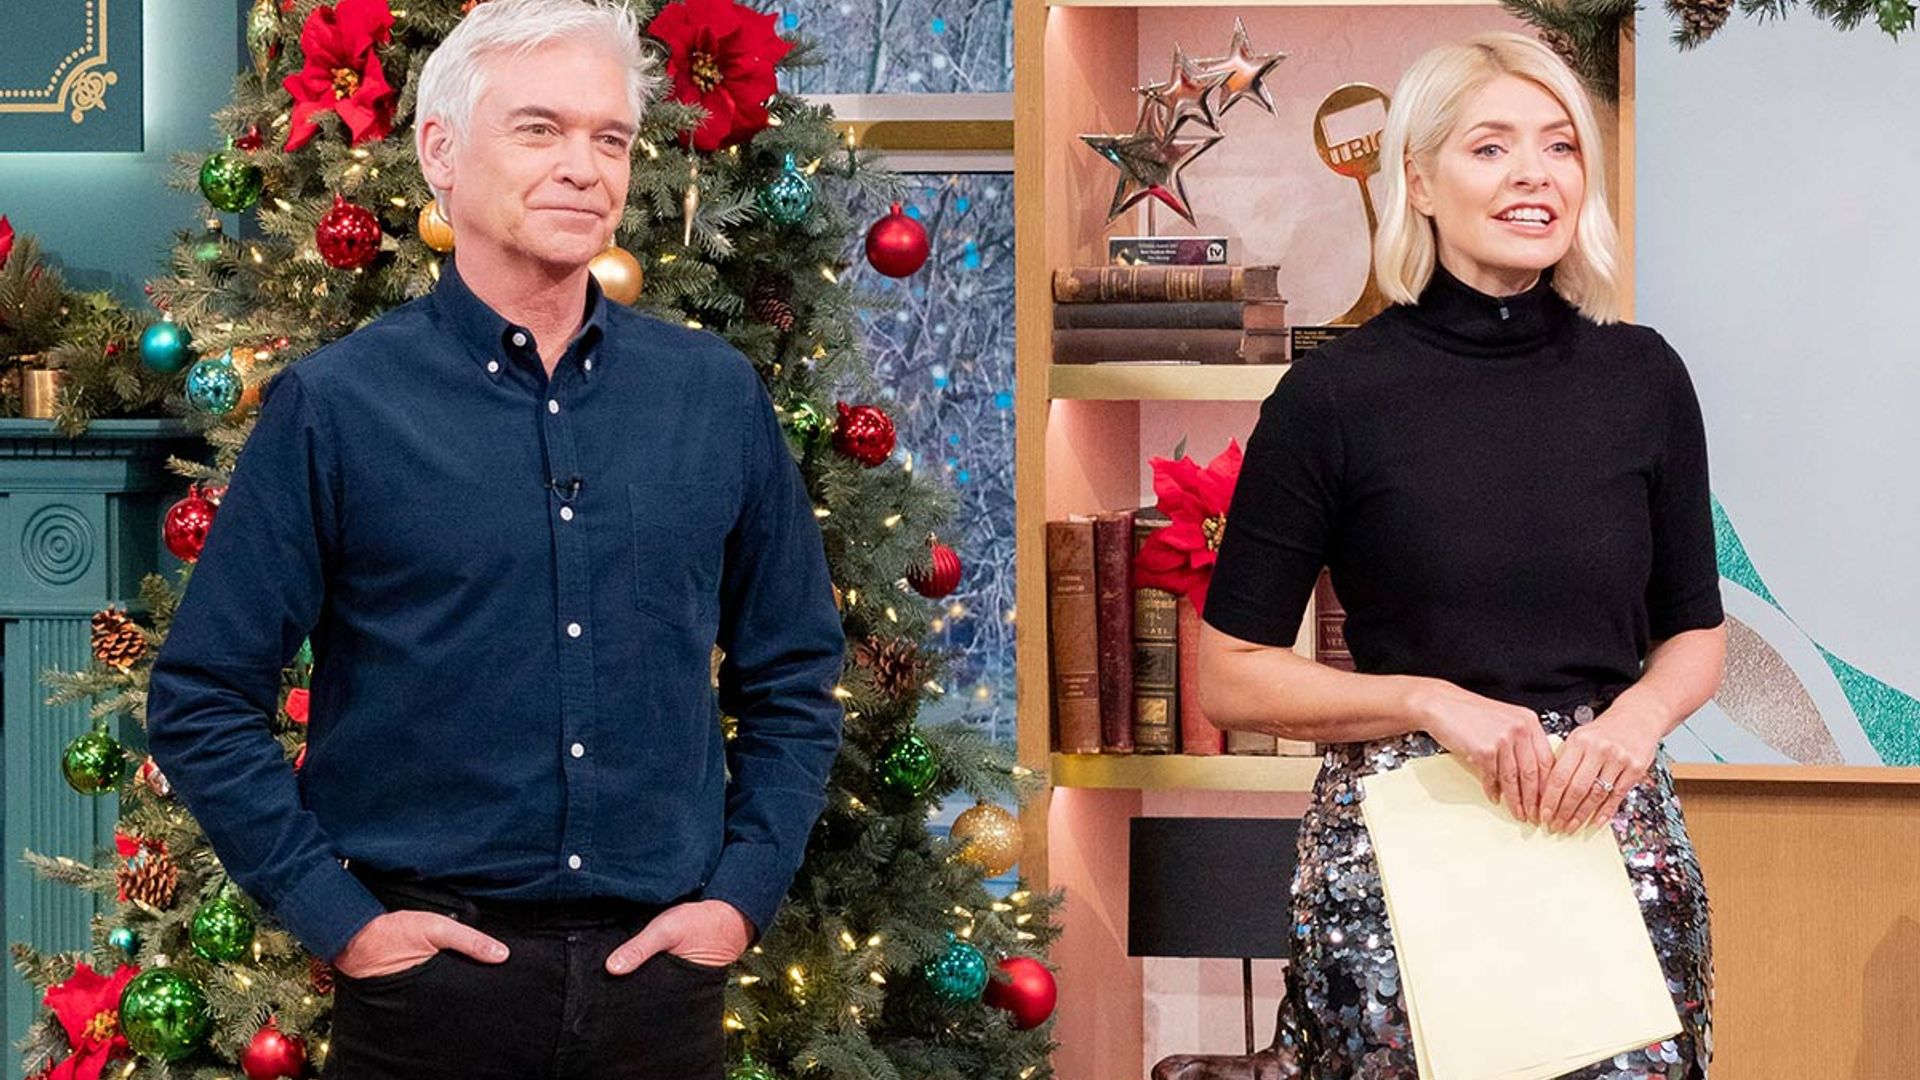 phillip-schofield-holly-willoughby-christmas